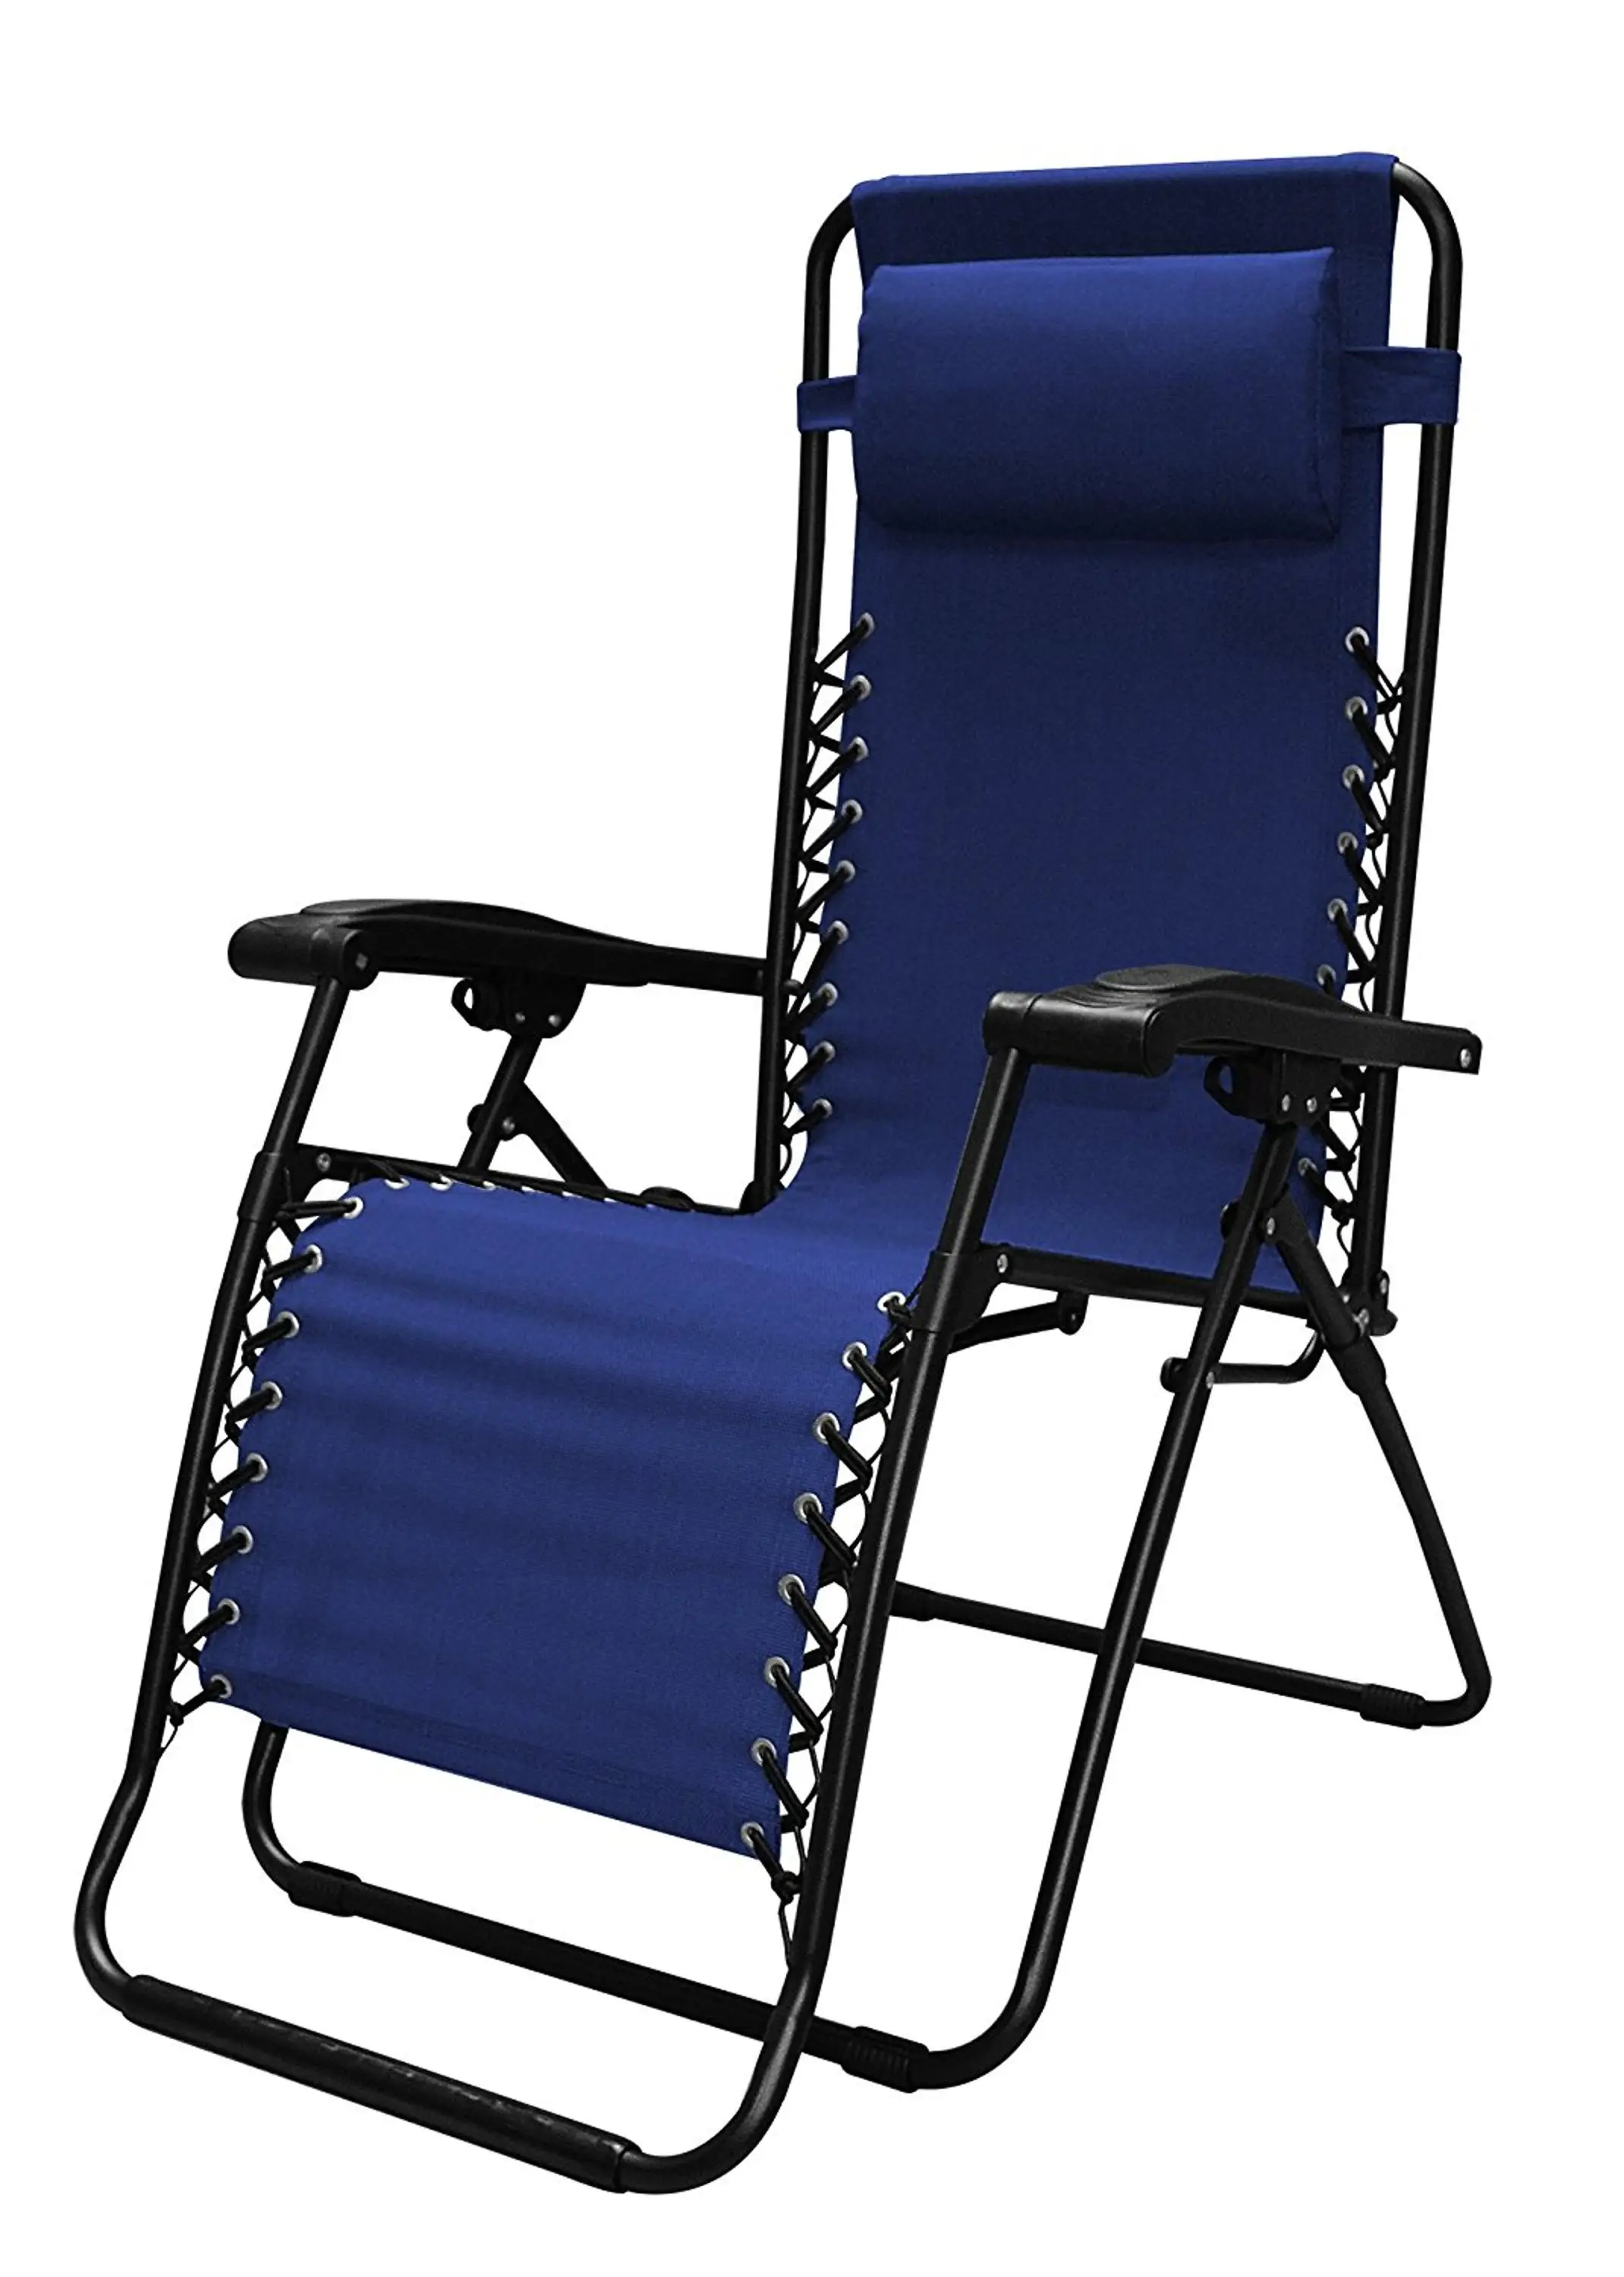 Zero Gravity Recliner Chair Adjustable Lounge Chair Buy Lounge